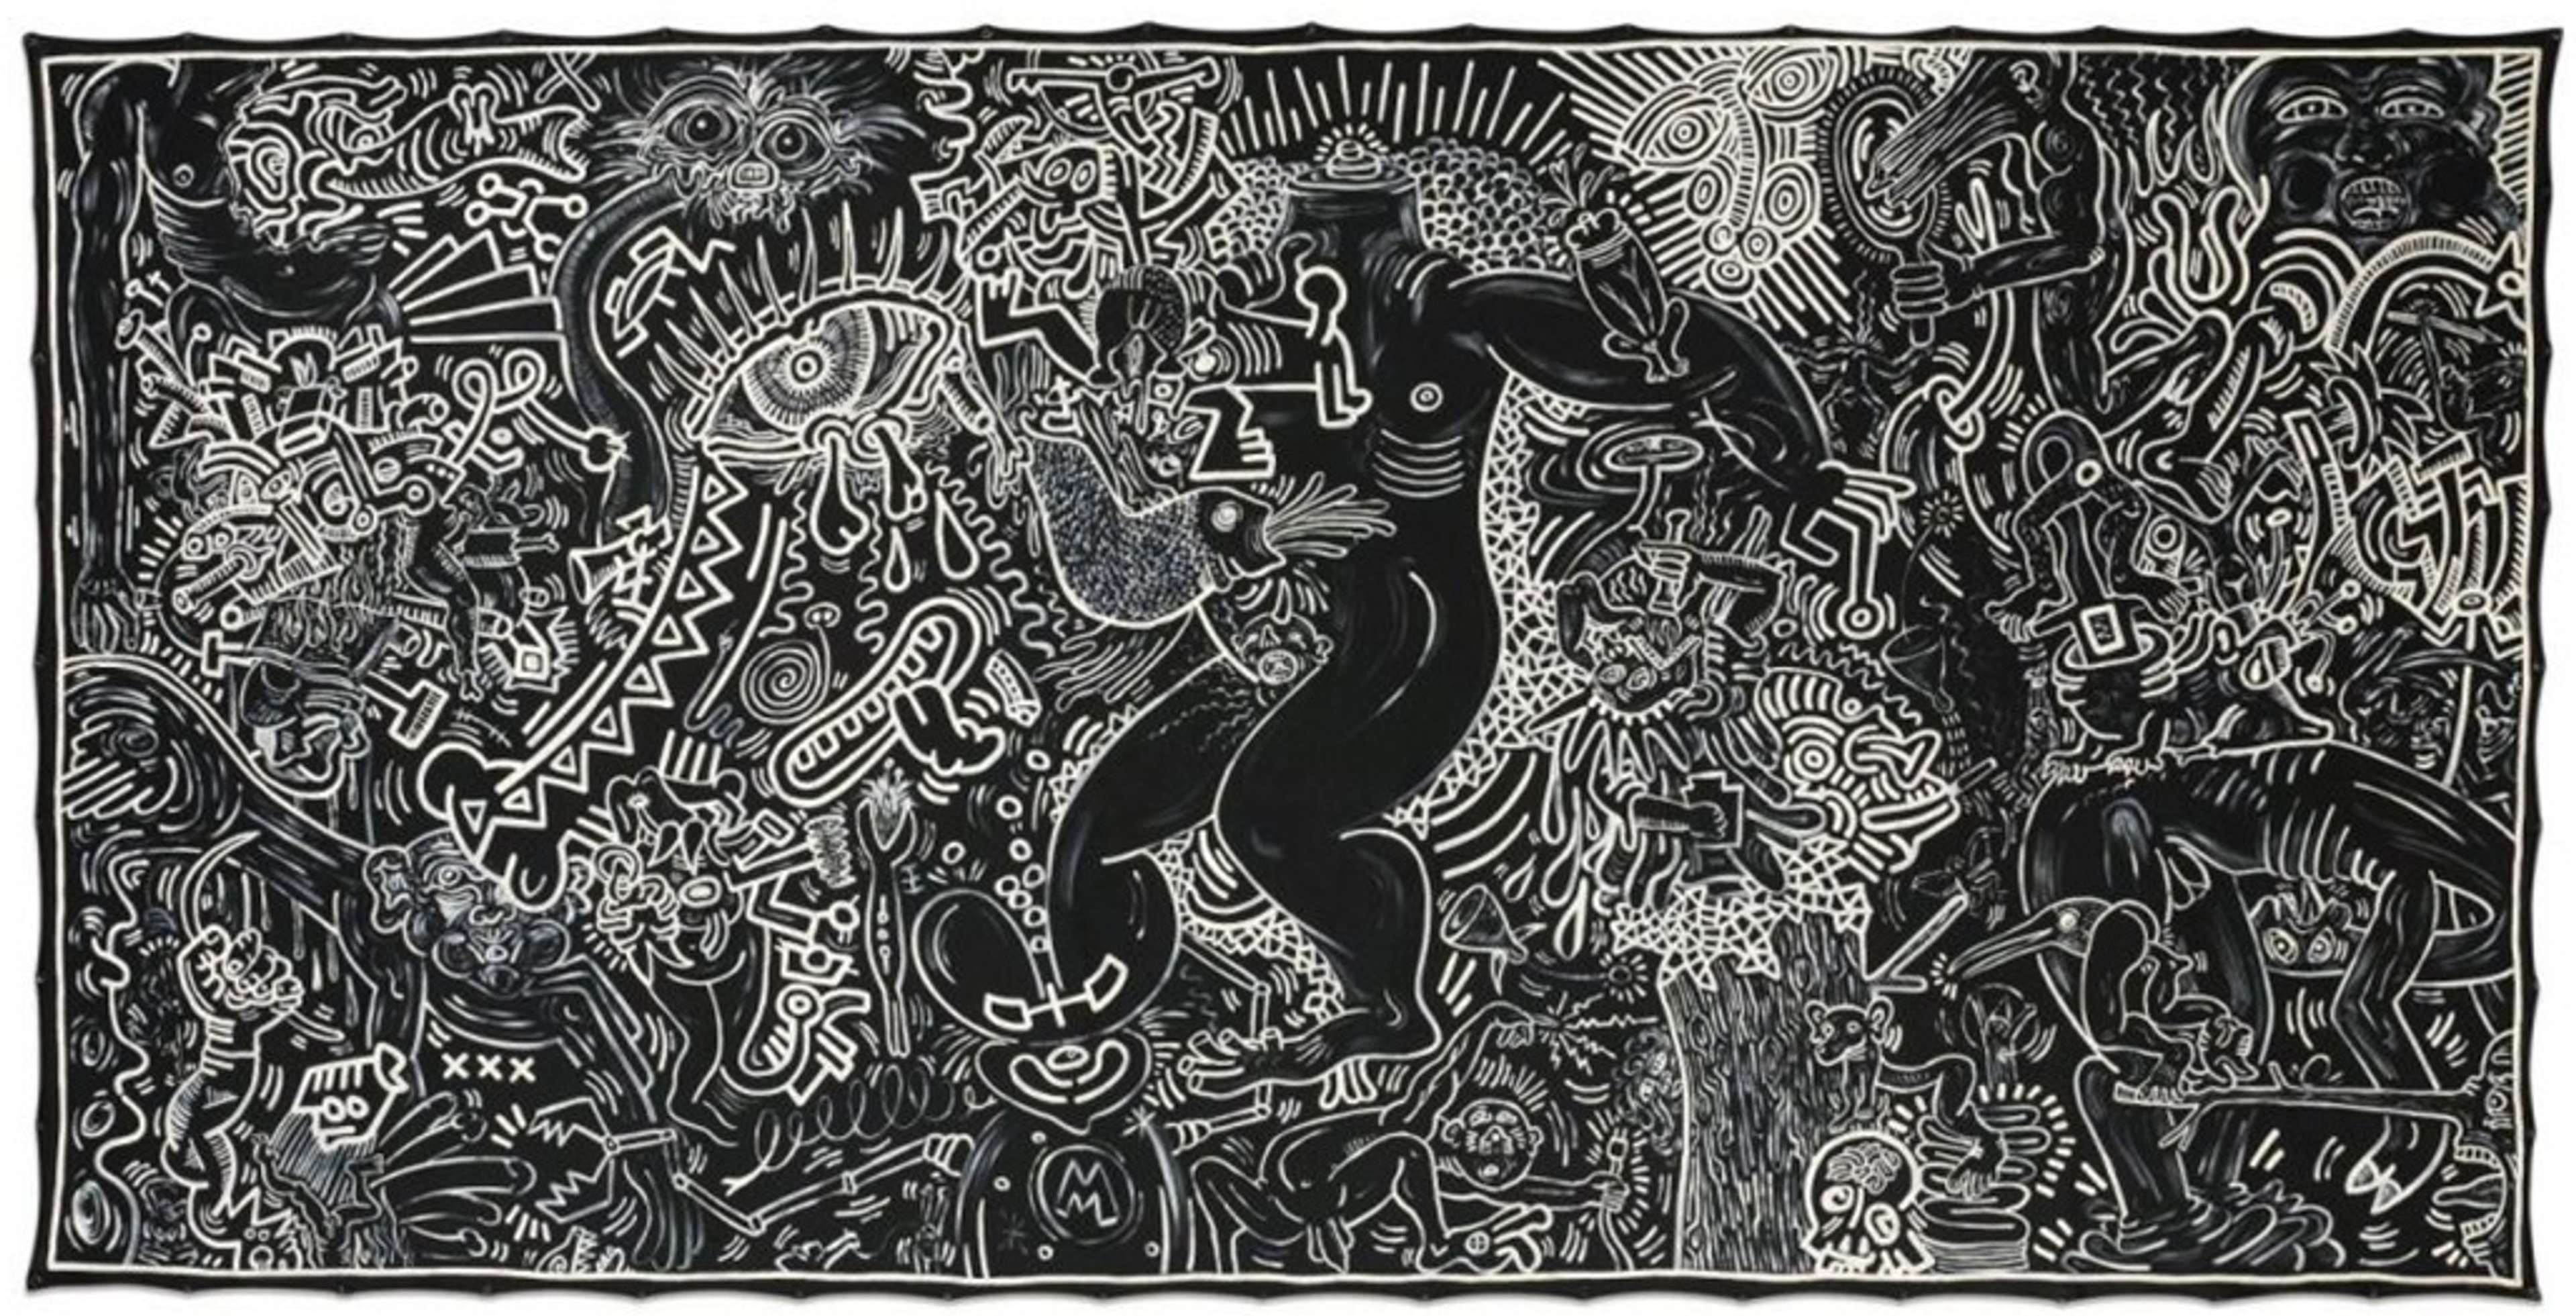 Untitled (September 14, 1986) by Keith Haring